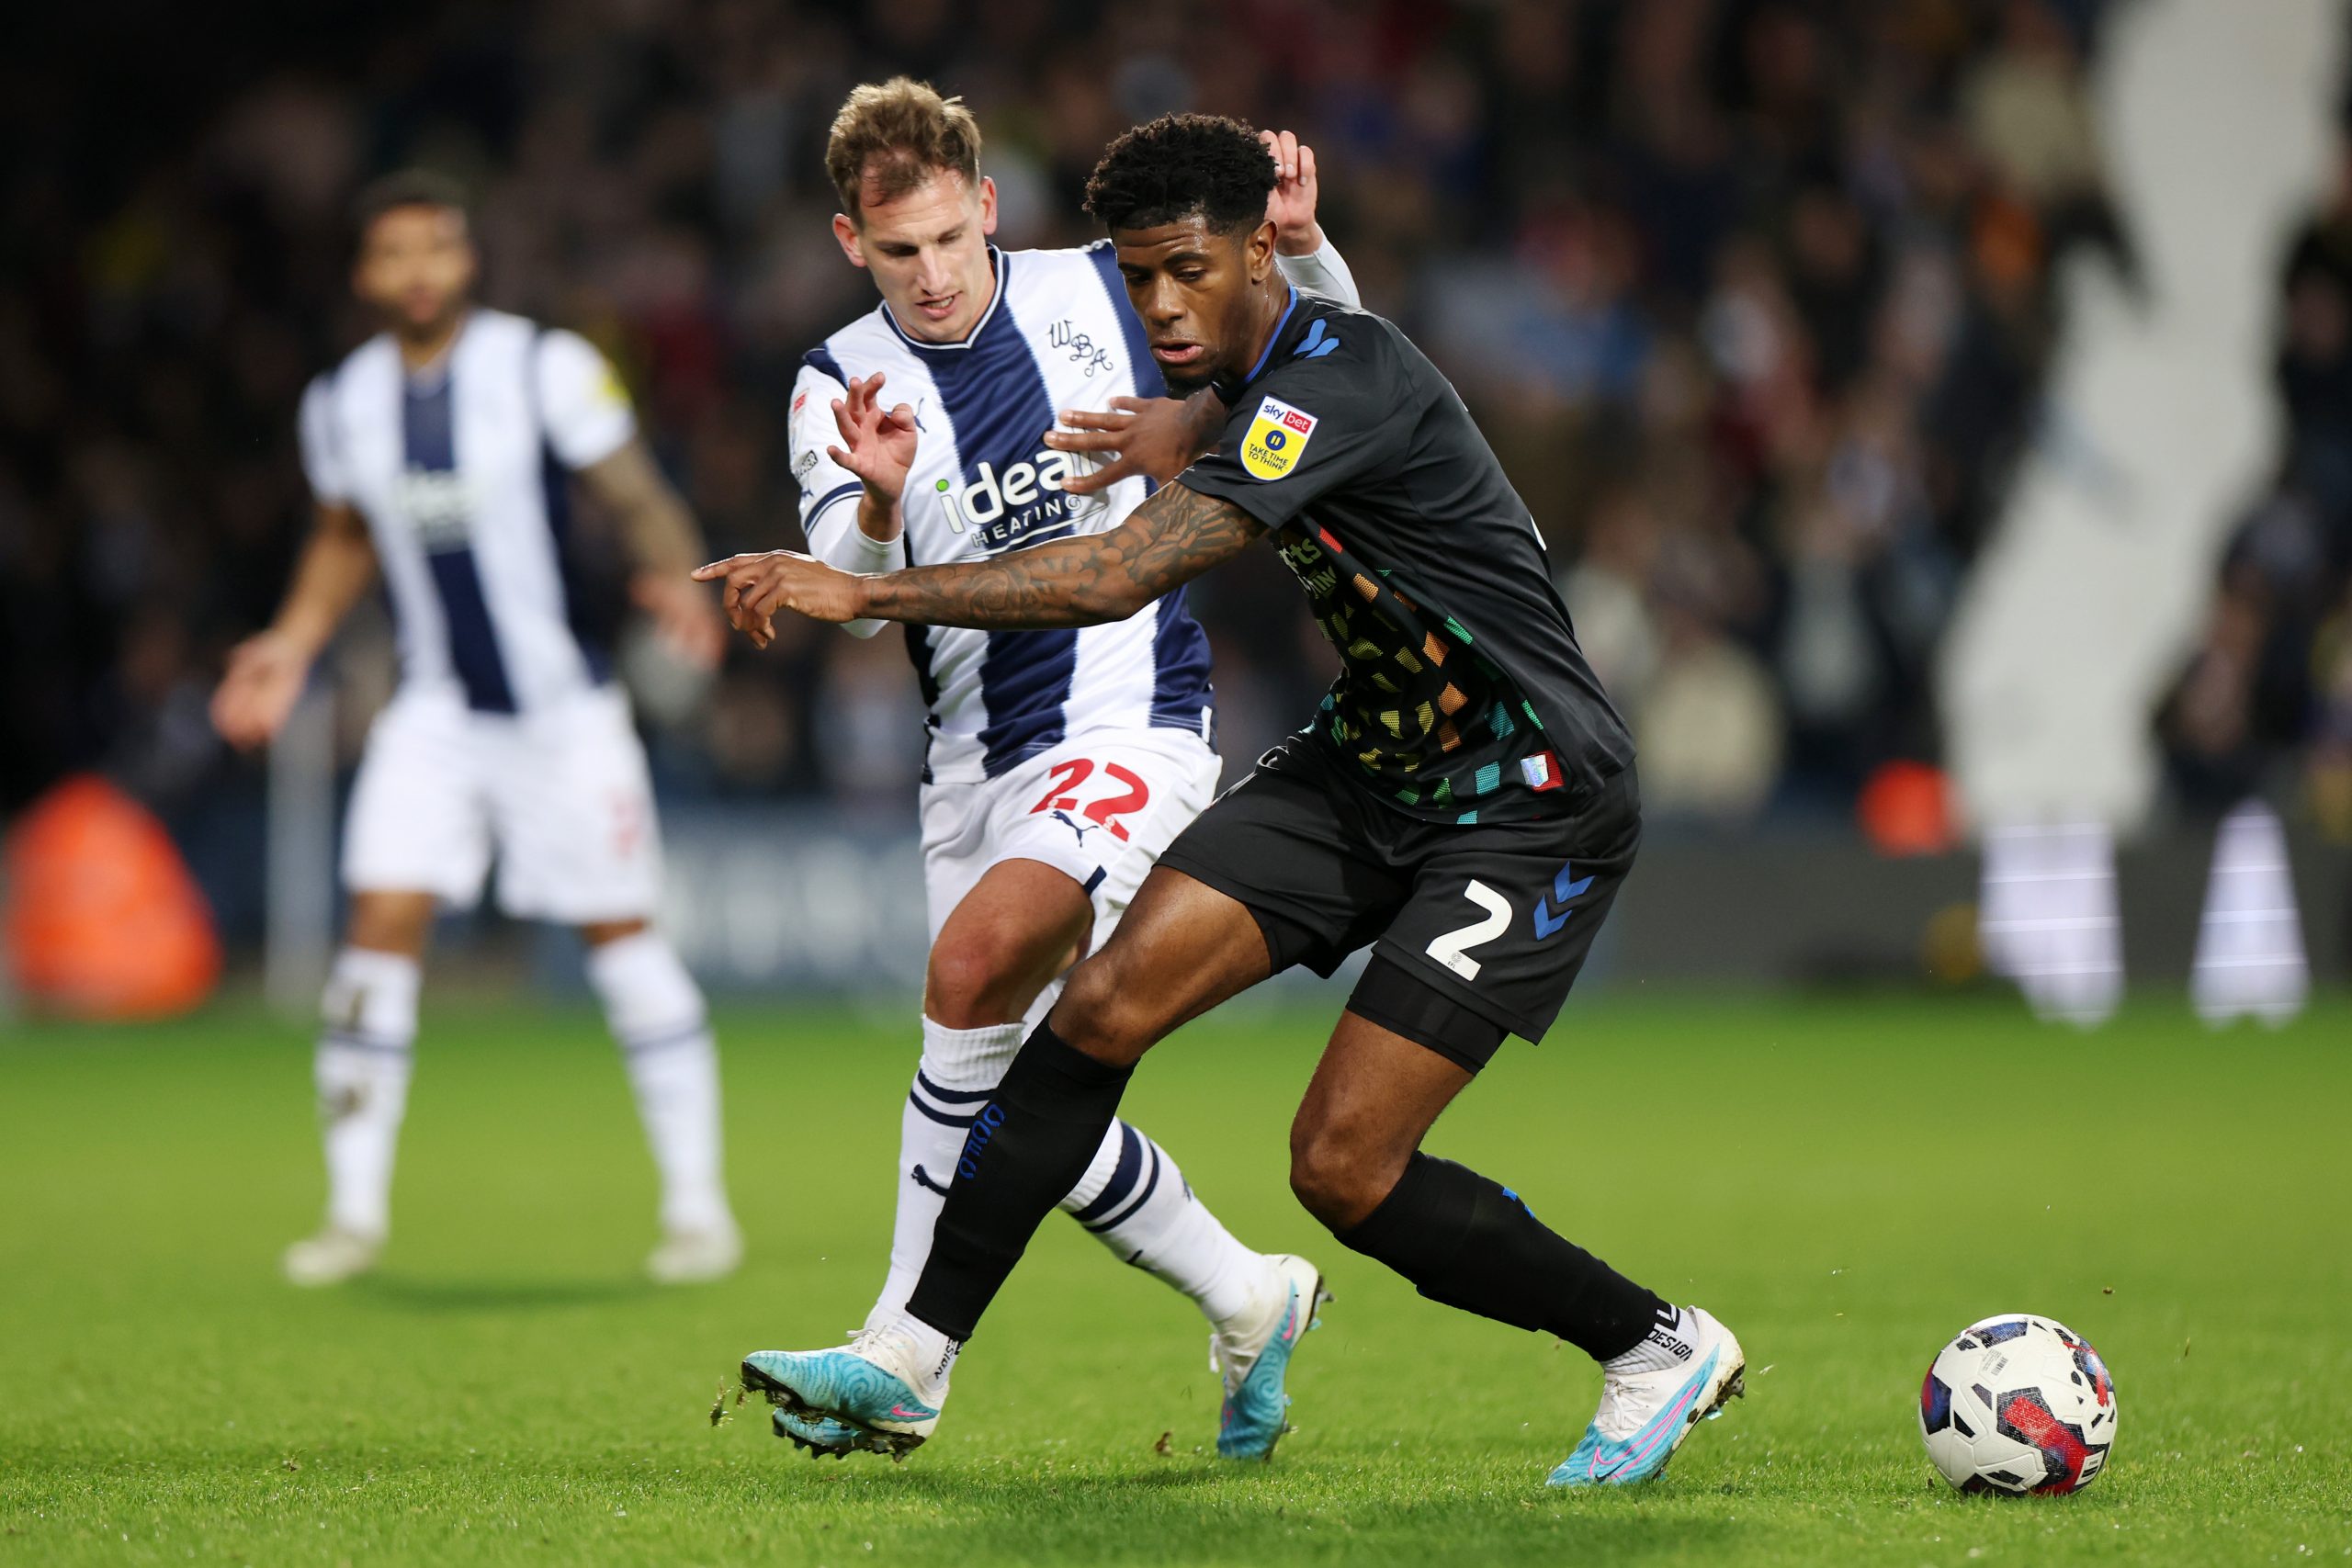 Rangers target Jonathan Panzo is in action against West Brom